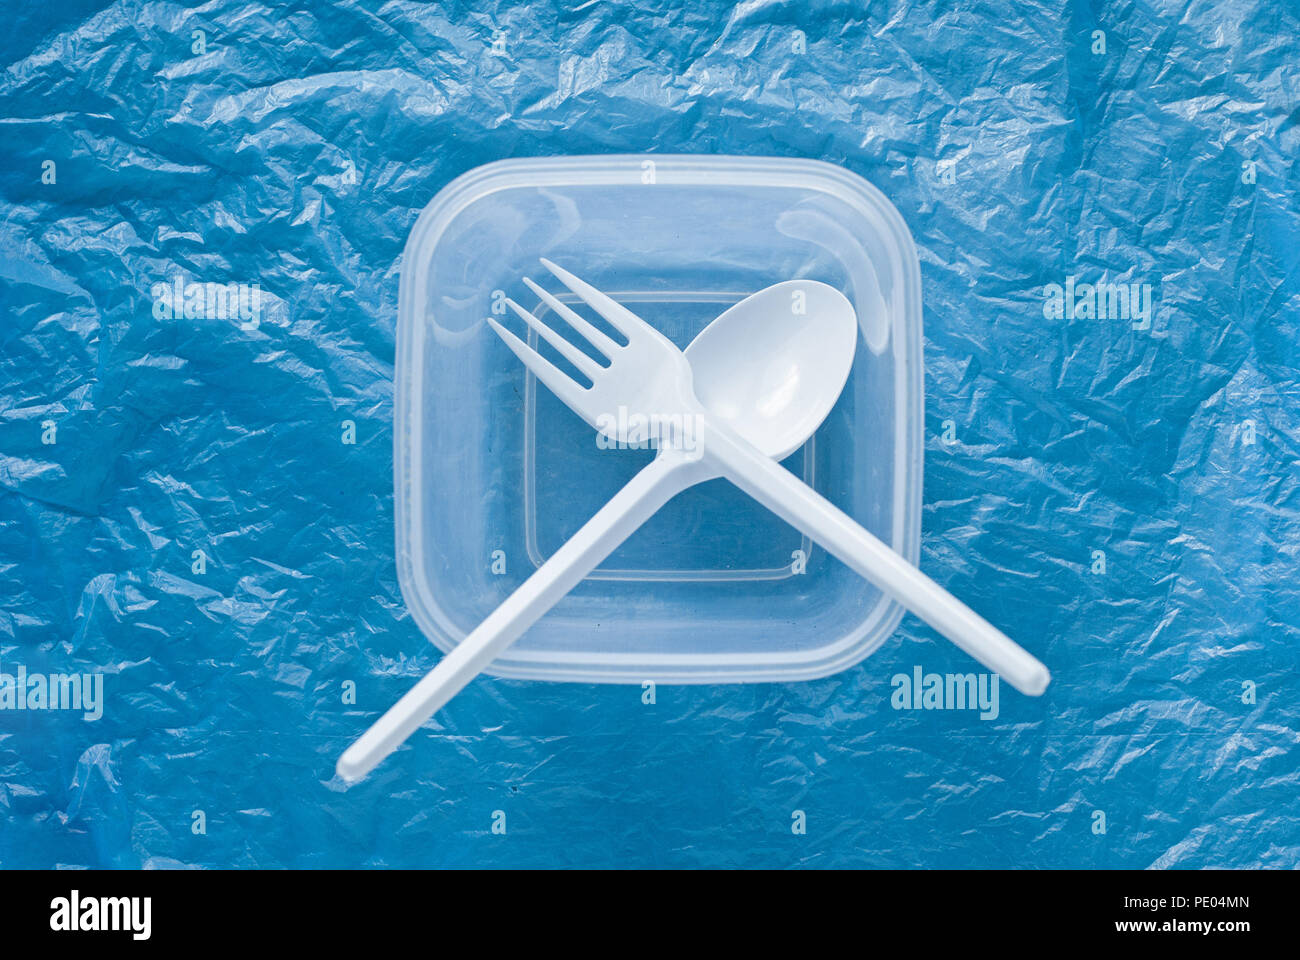 white plastic spoon and fork in a plastic container on a blue plastic bag Stock Photo